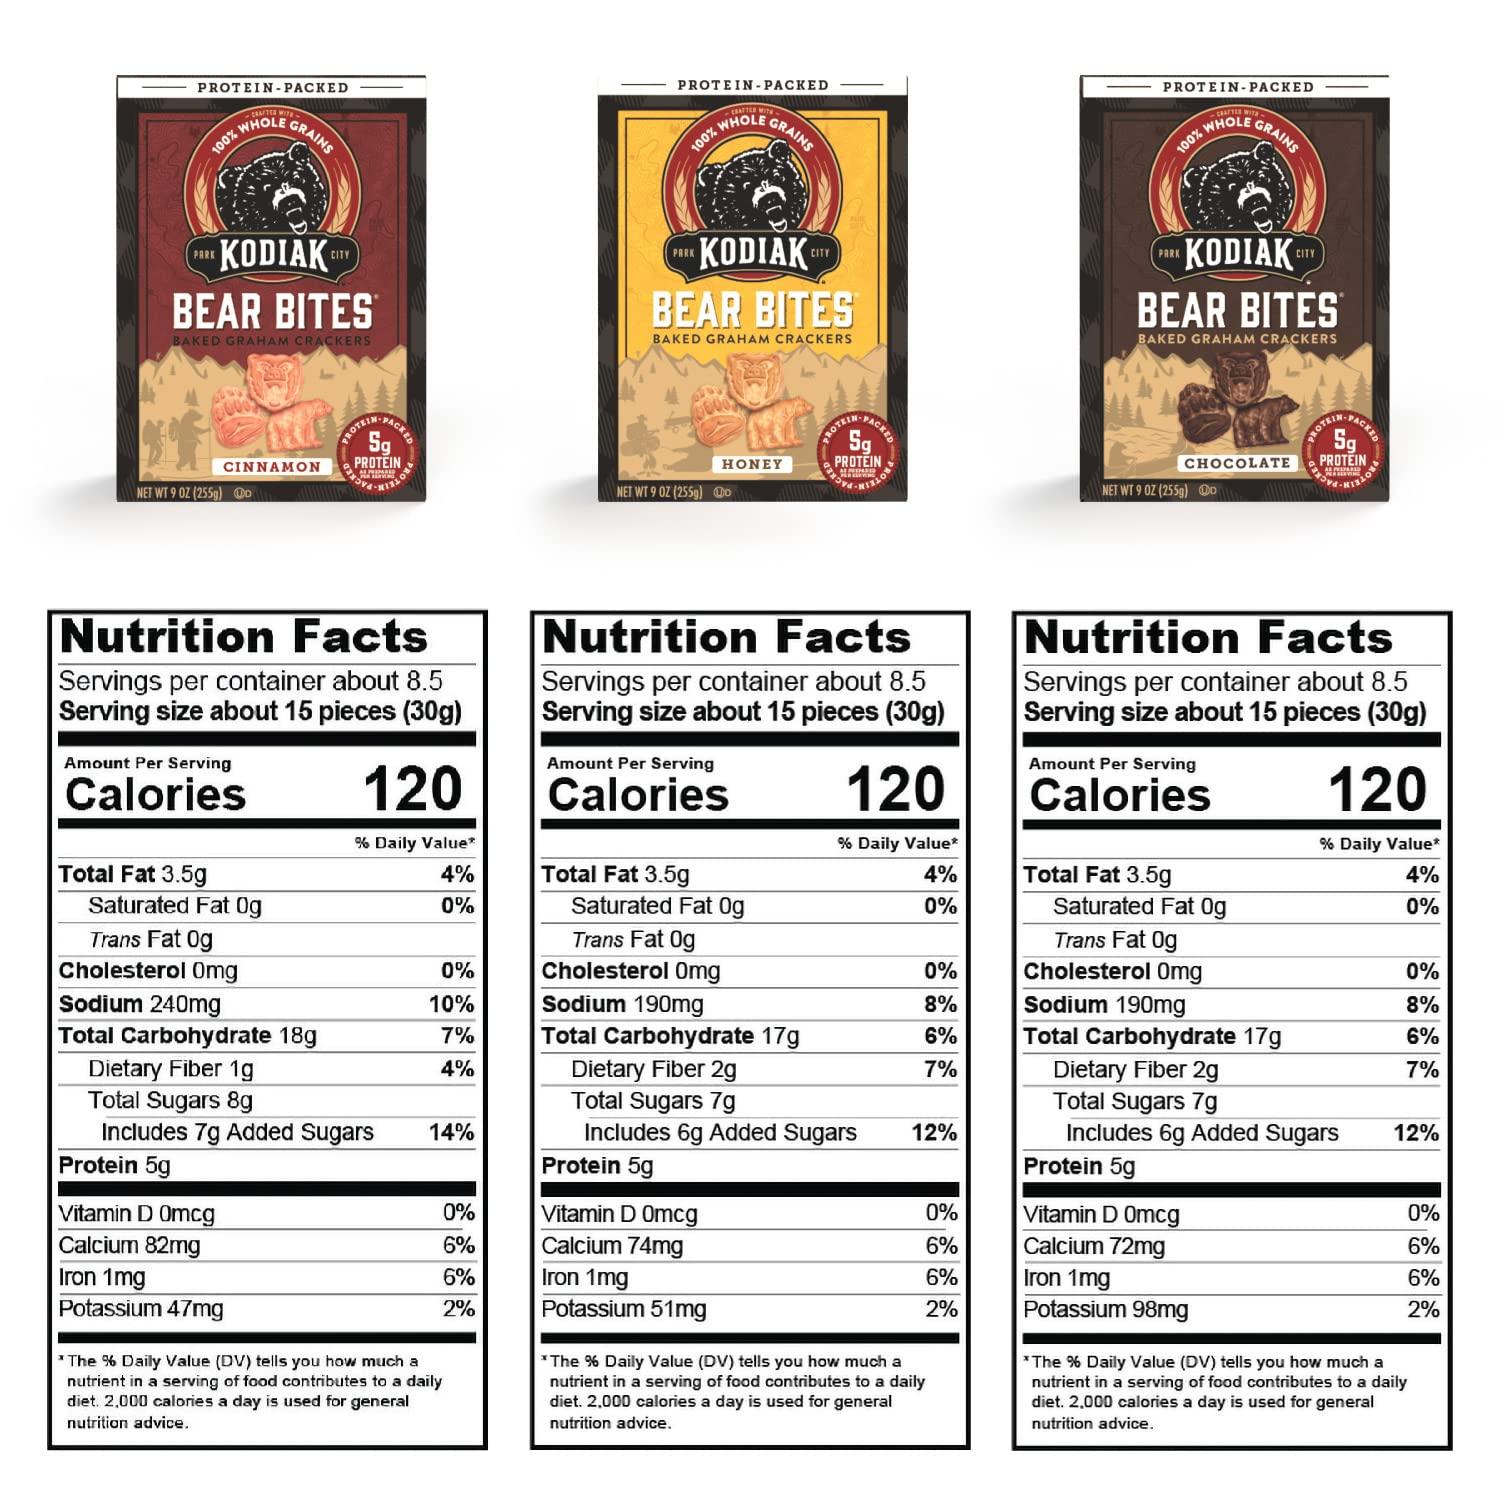 Kodiak Cakes Bear Bites - Protein Packed Baked Graham Crackers Variety Pack  - 100% Whole Grains - Honey, Chocolate & Cinnamon Cookies Snacks - 9 Ounce  (Pack of 3) Bear Bites Variety Pack